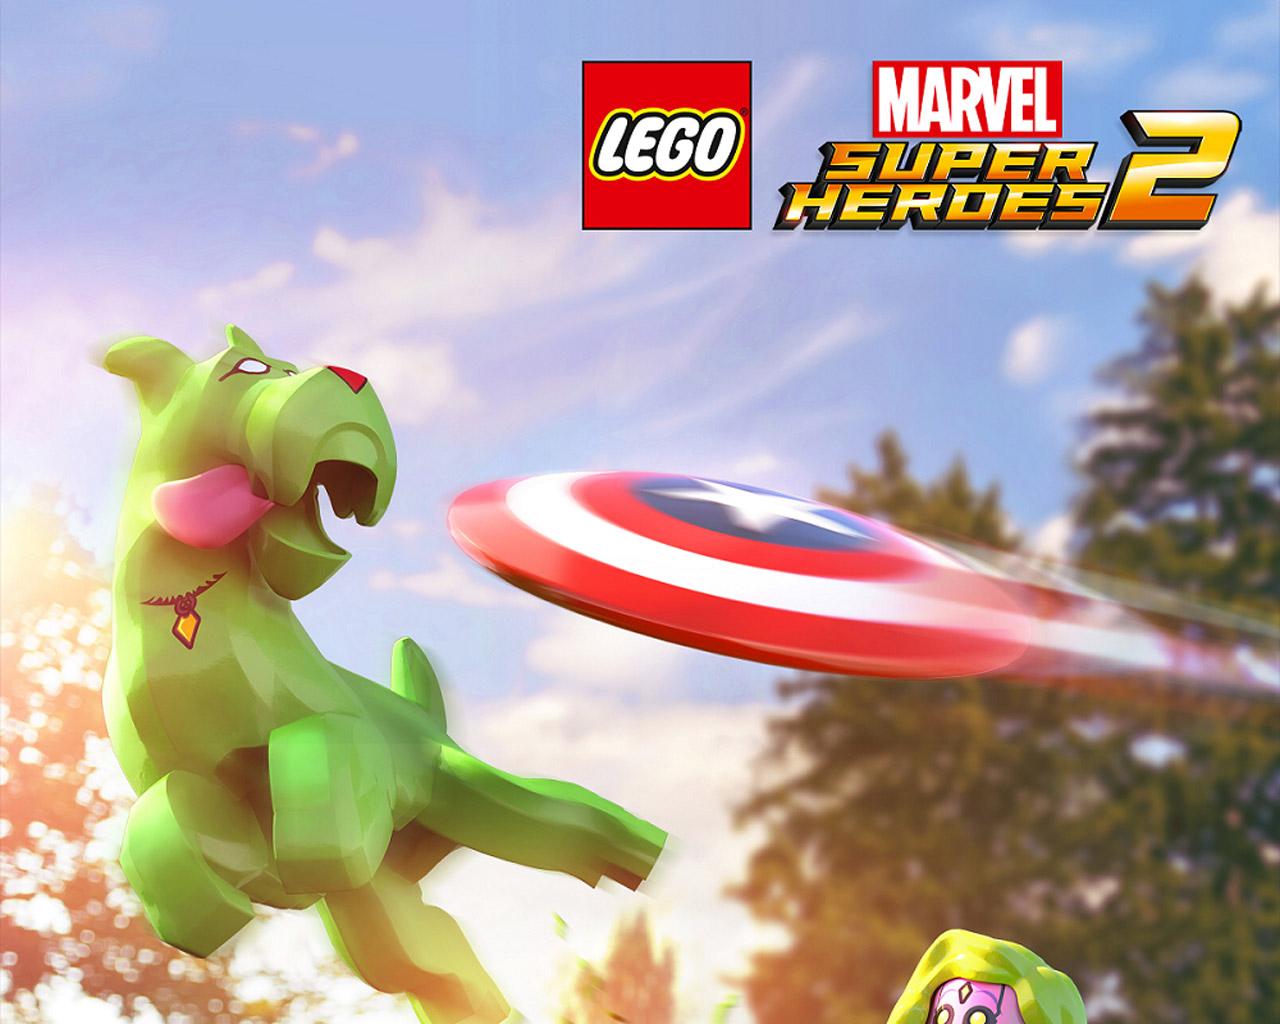 Free Lego Marvel Super Heroes 2 Wallpaper in 1280x1024